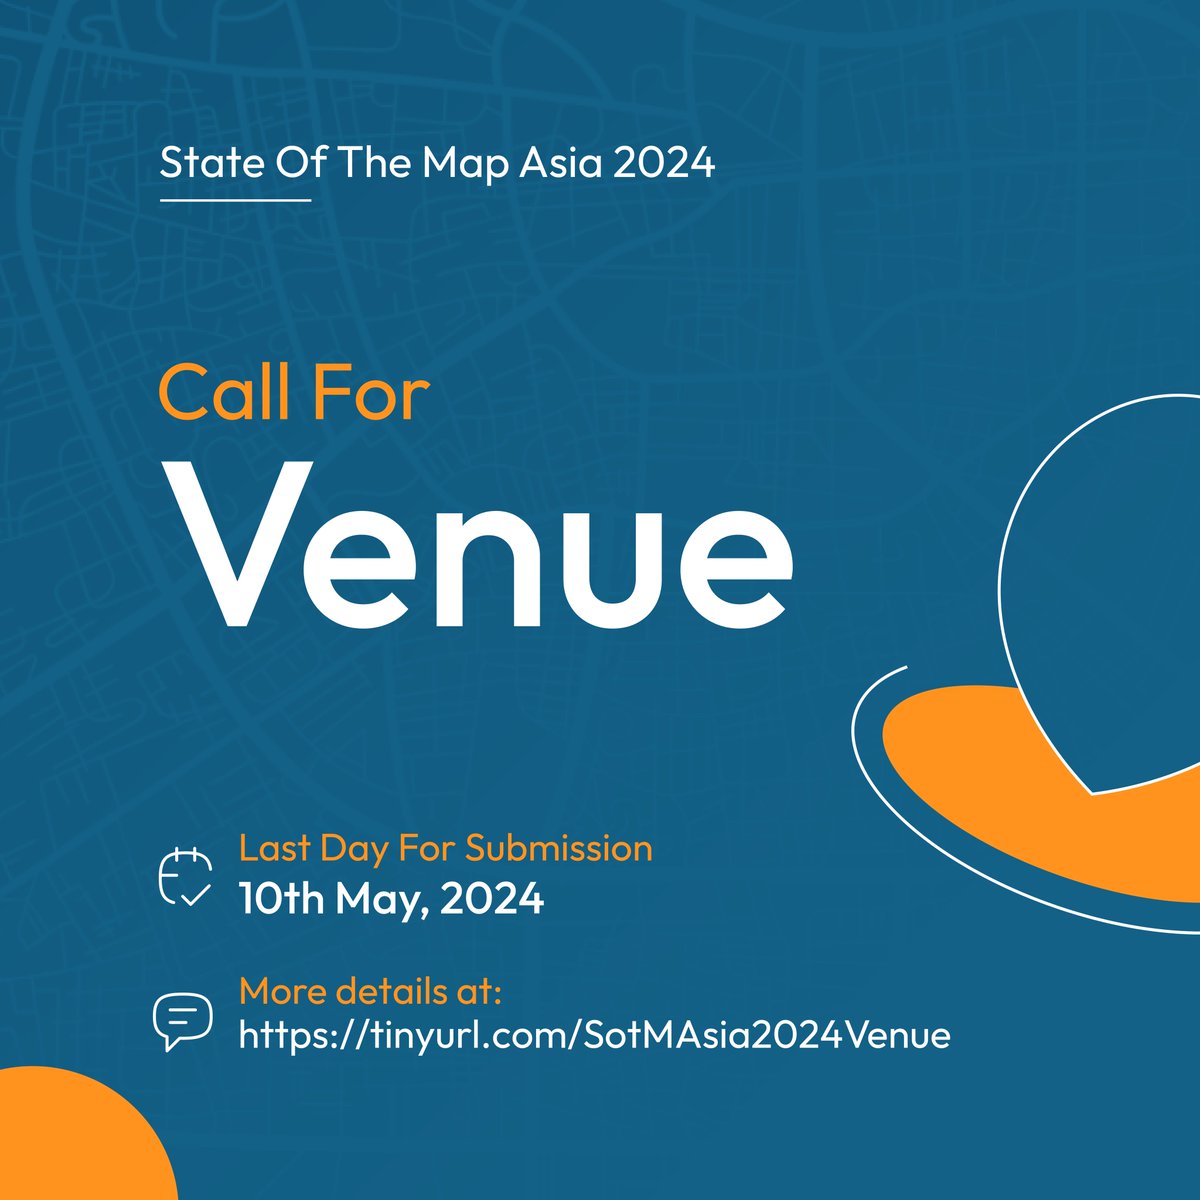 State of the Map Asia 2024 | #SotMAsia2024 Call for Venue is now open Submit your proposal by 10 May 2024 Announcement of venue: on or before end of May tinyurl.com/SotMAsia2024Ve…